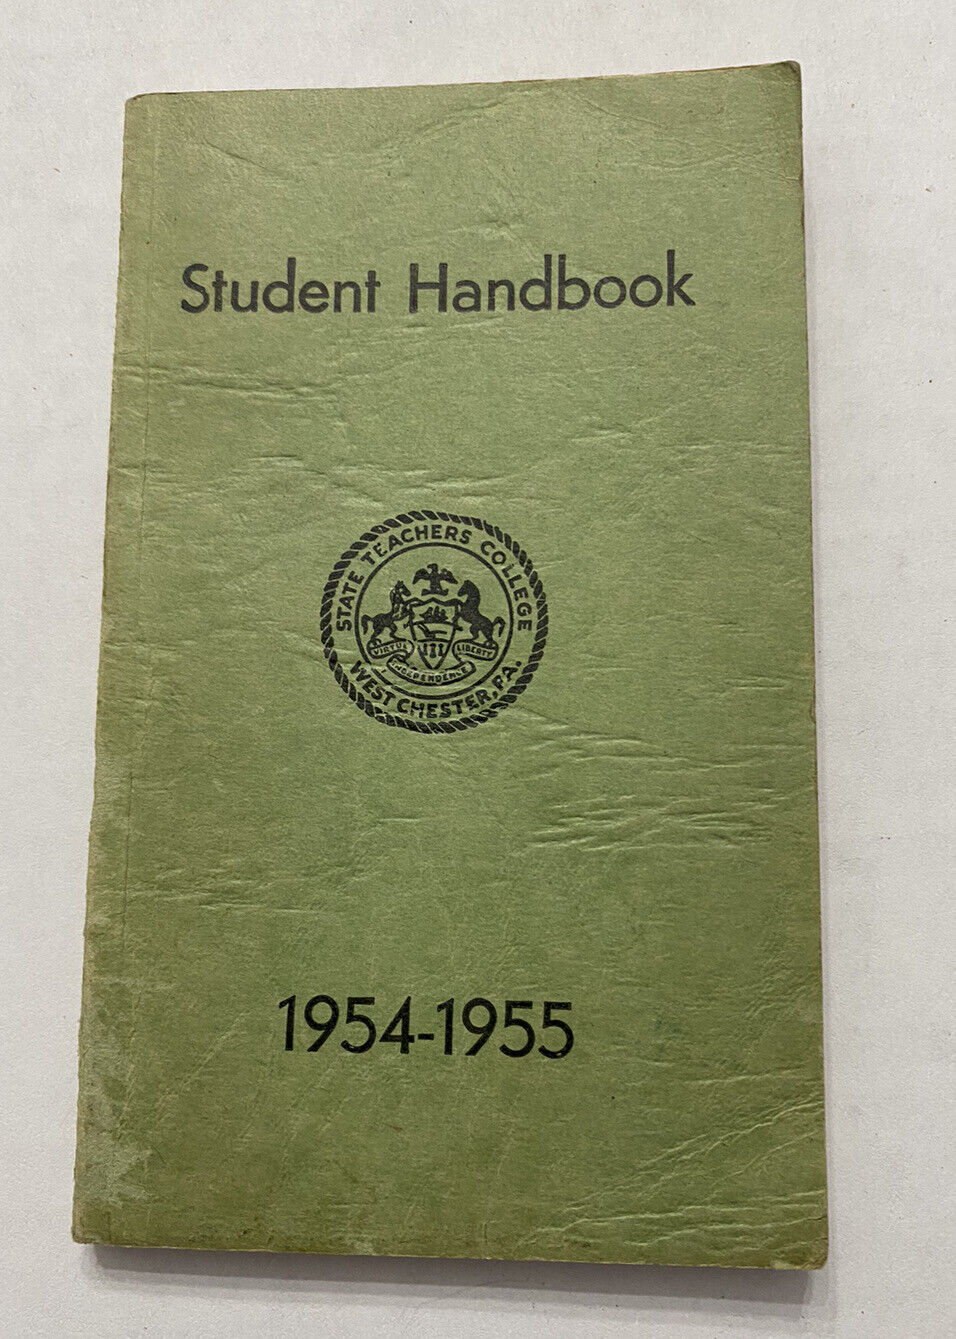 Student Handbook 1954-1955 State Teachers College West Chester PA